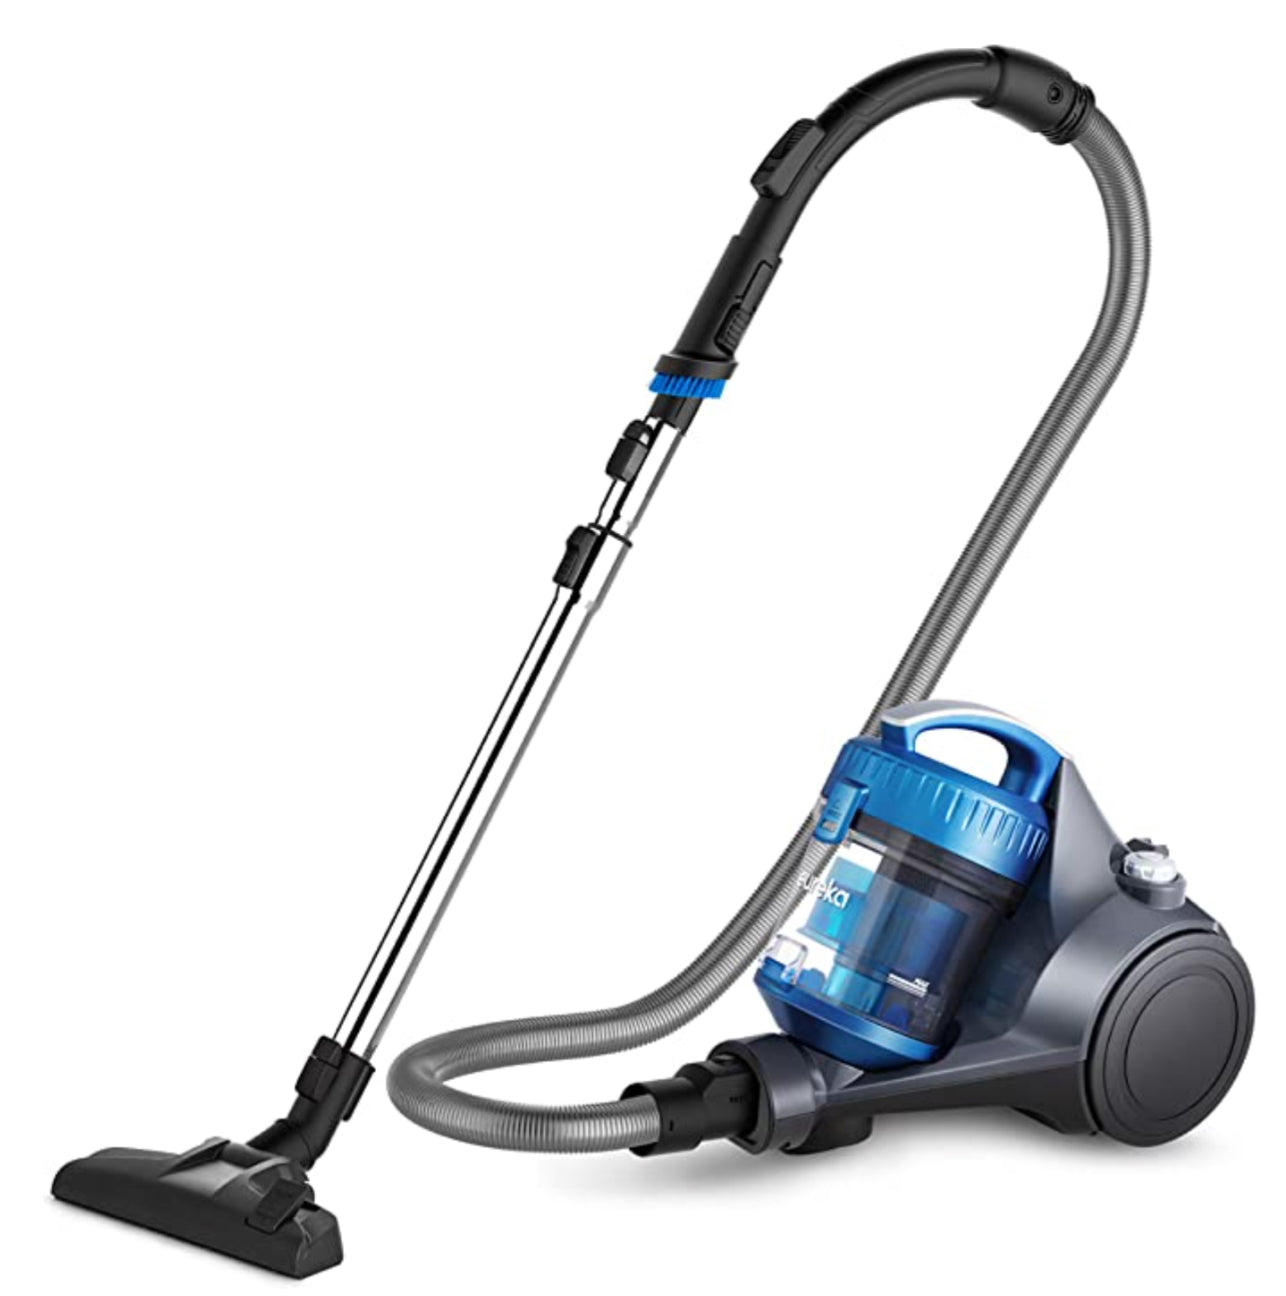 WhirlWind Bagless Canister Vacuum Cleaner